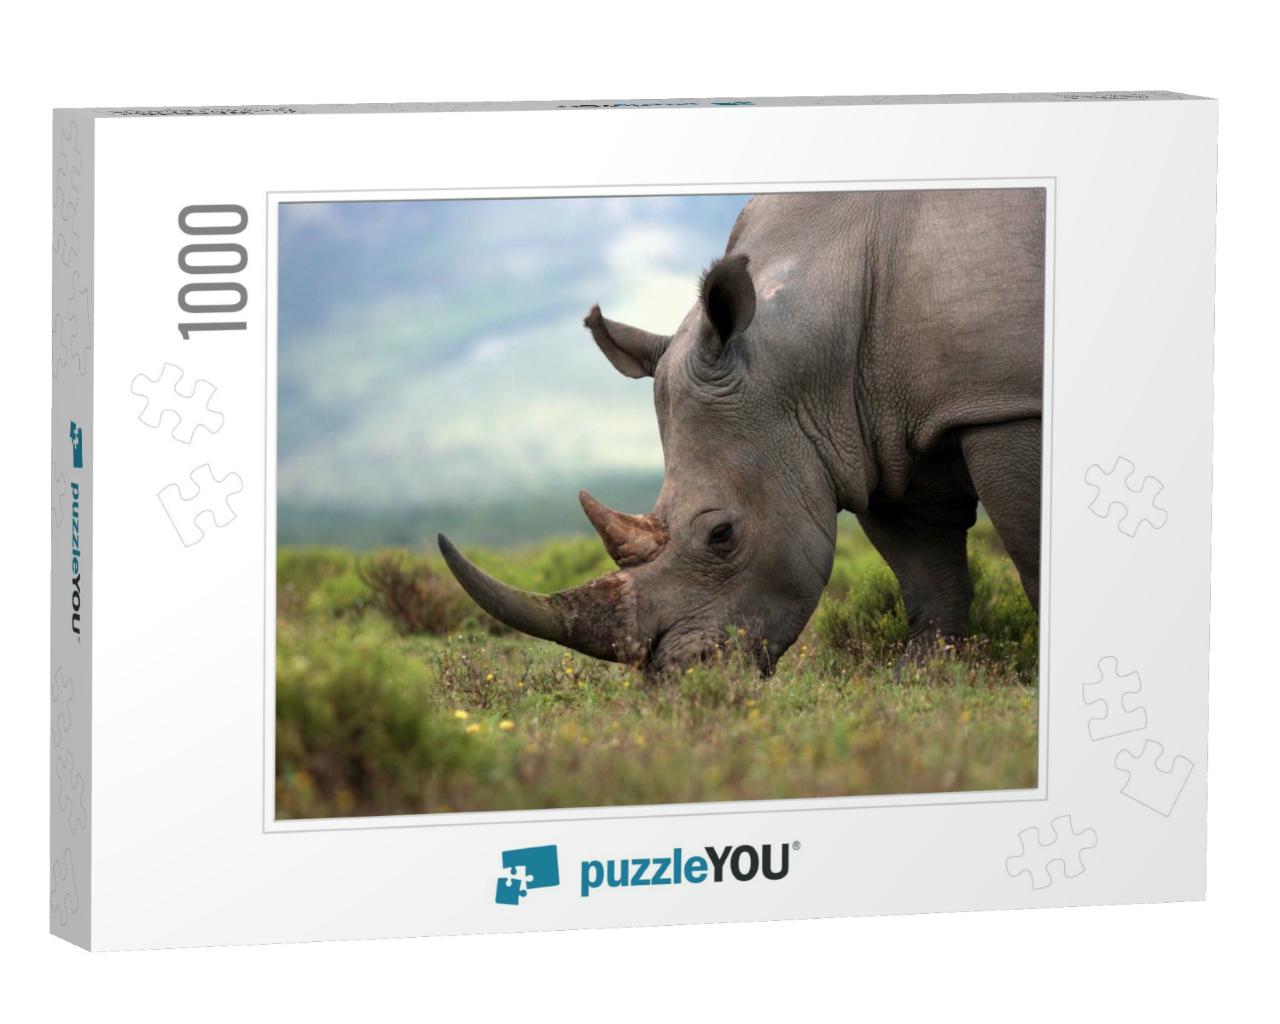 A Close Up Photo of an Endangered White Rhino / Rhinocero... Jigsaw Puzzle with 1000 pieces